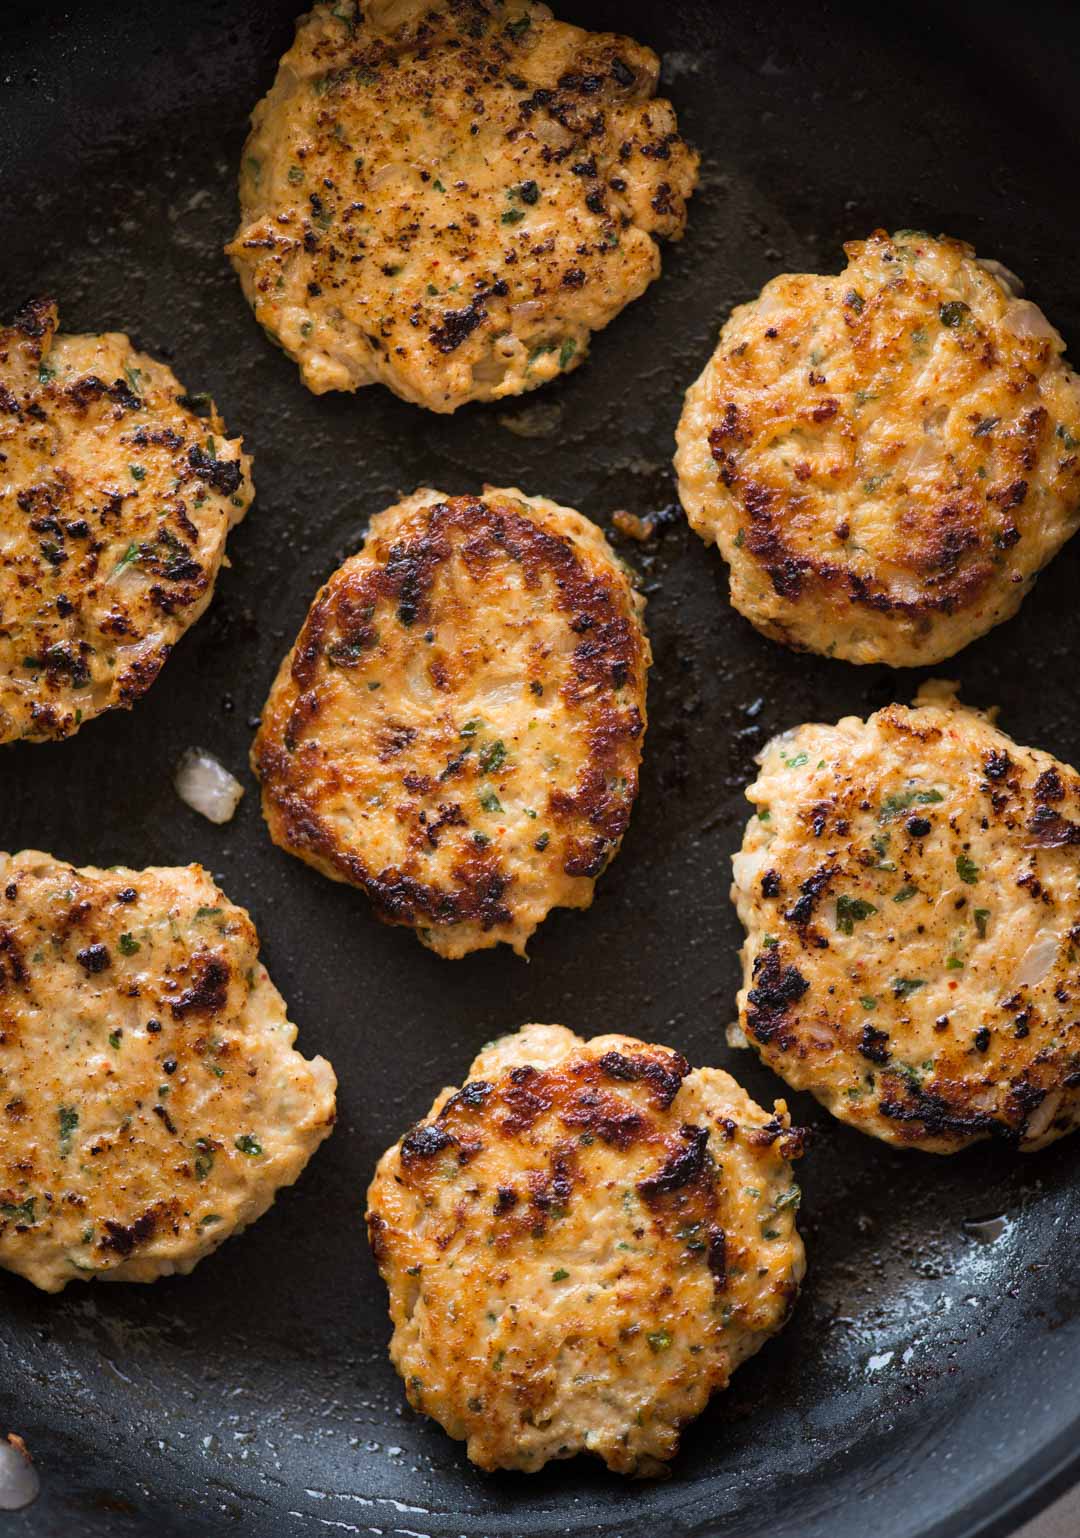 Juicy Chicken patties are easy and quick to make. Mildy spicy, flavourful and perfect to use in burgers, wraps, sandwich or serve as a snack as it is.